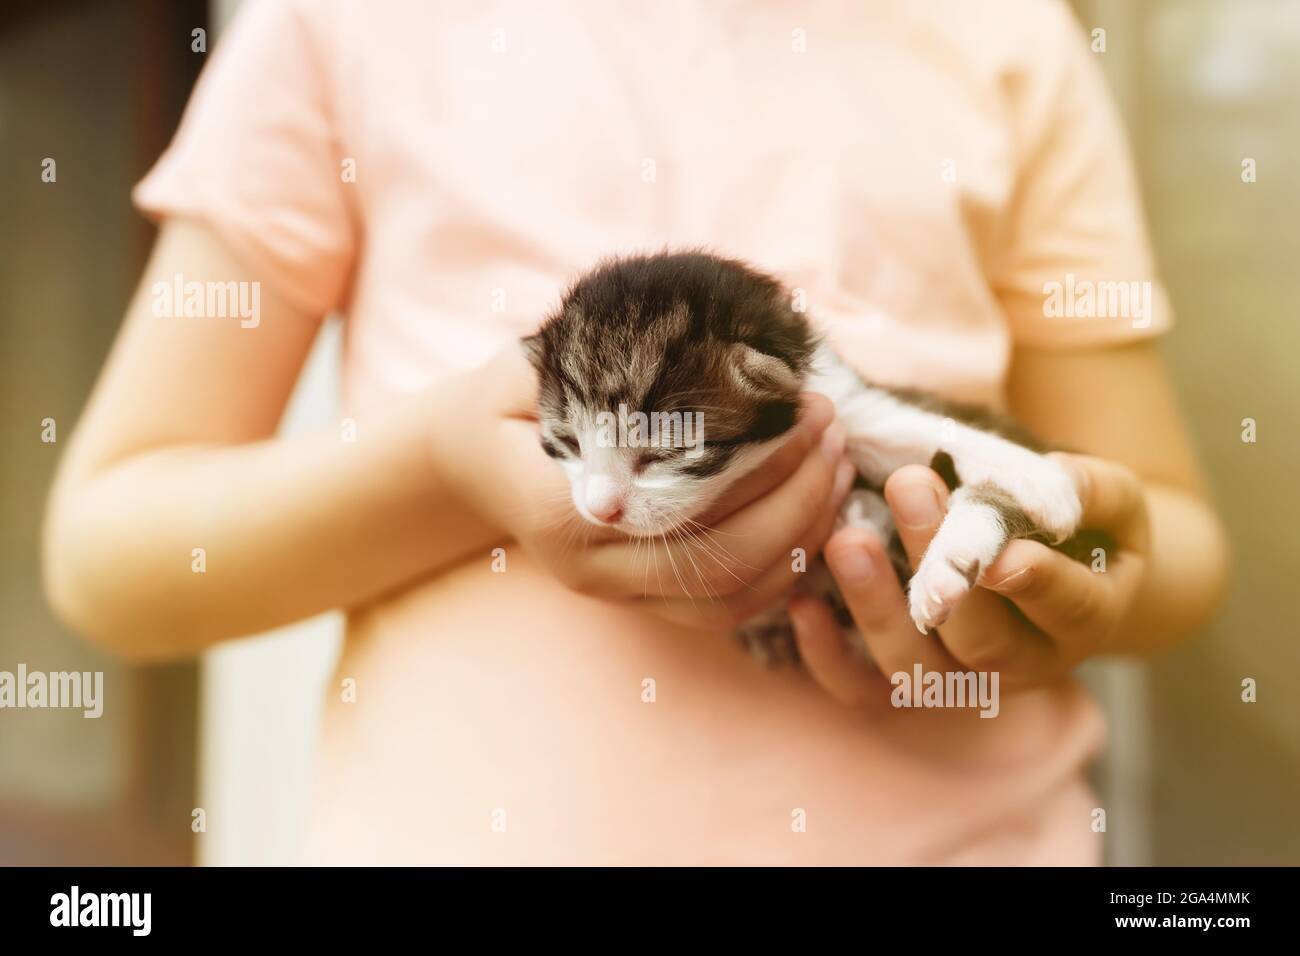 Little girl holding a little kitten with closed eyes in her arms. Pet care concept. Child playing with adorable newborn cat. High quality photo Stock Photo